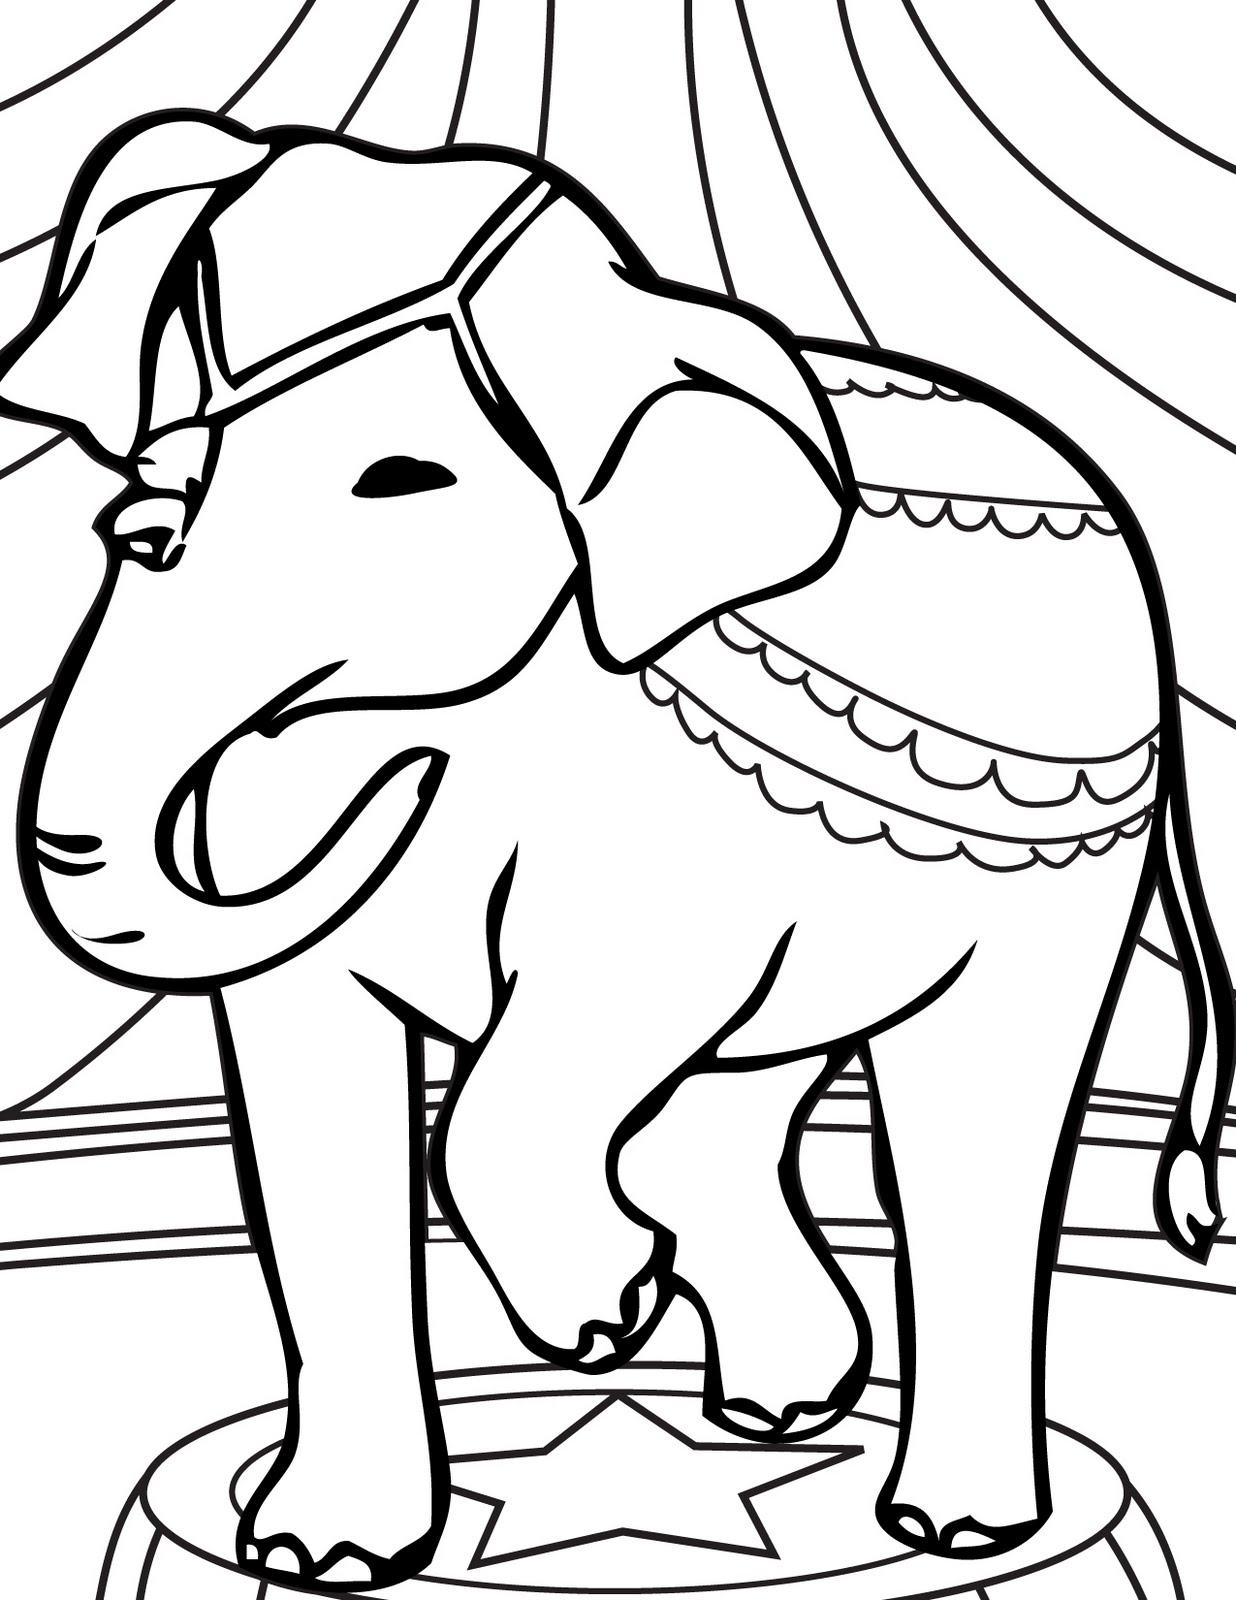 Coloring Page Of An Elephant | Animal Coloring Pages | Kids 